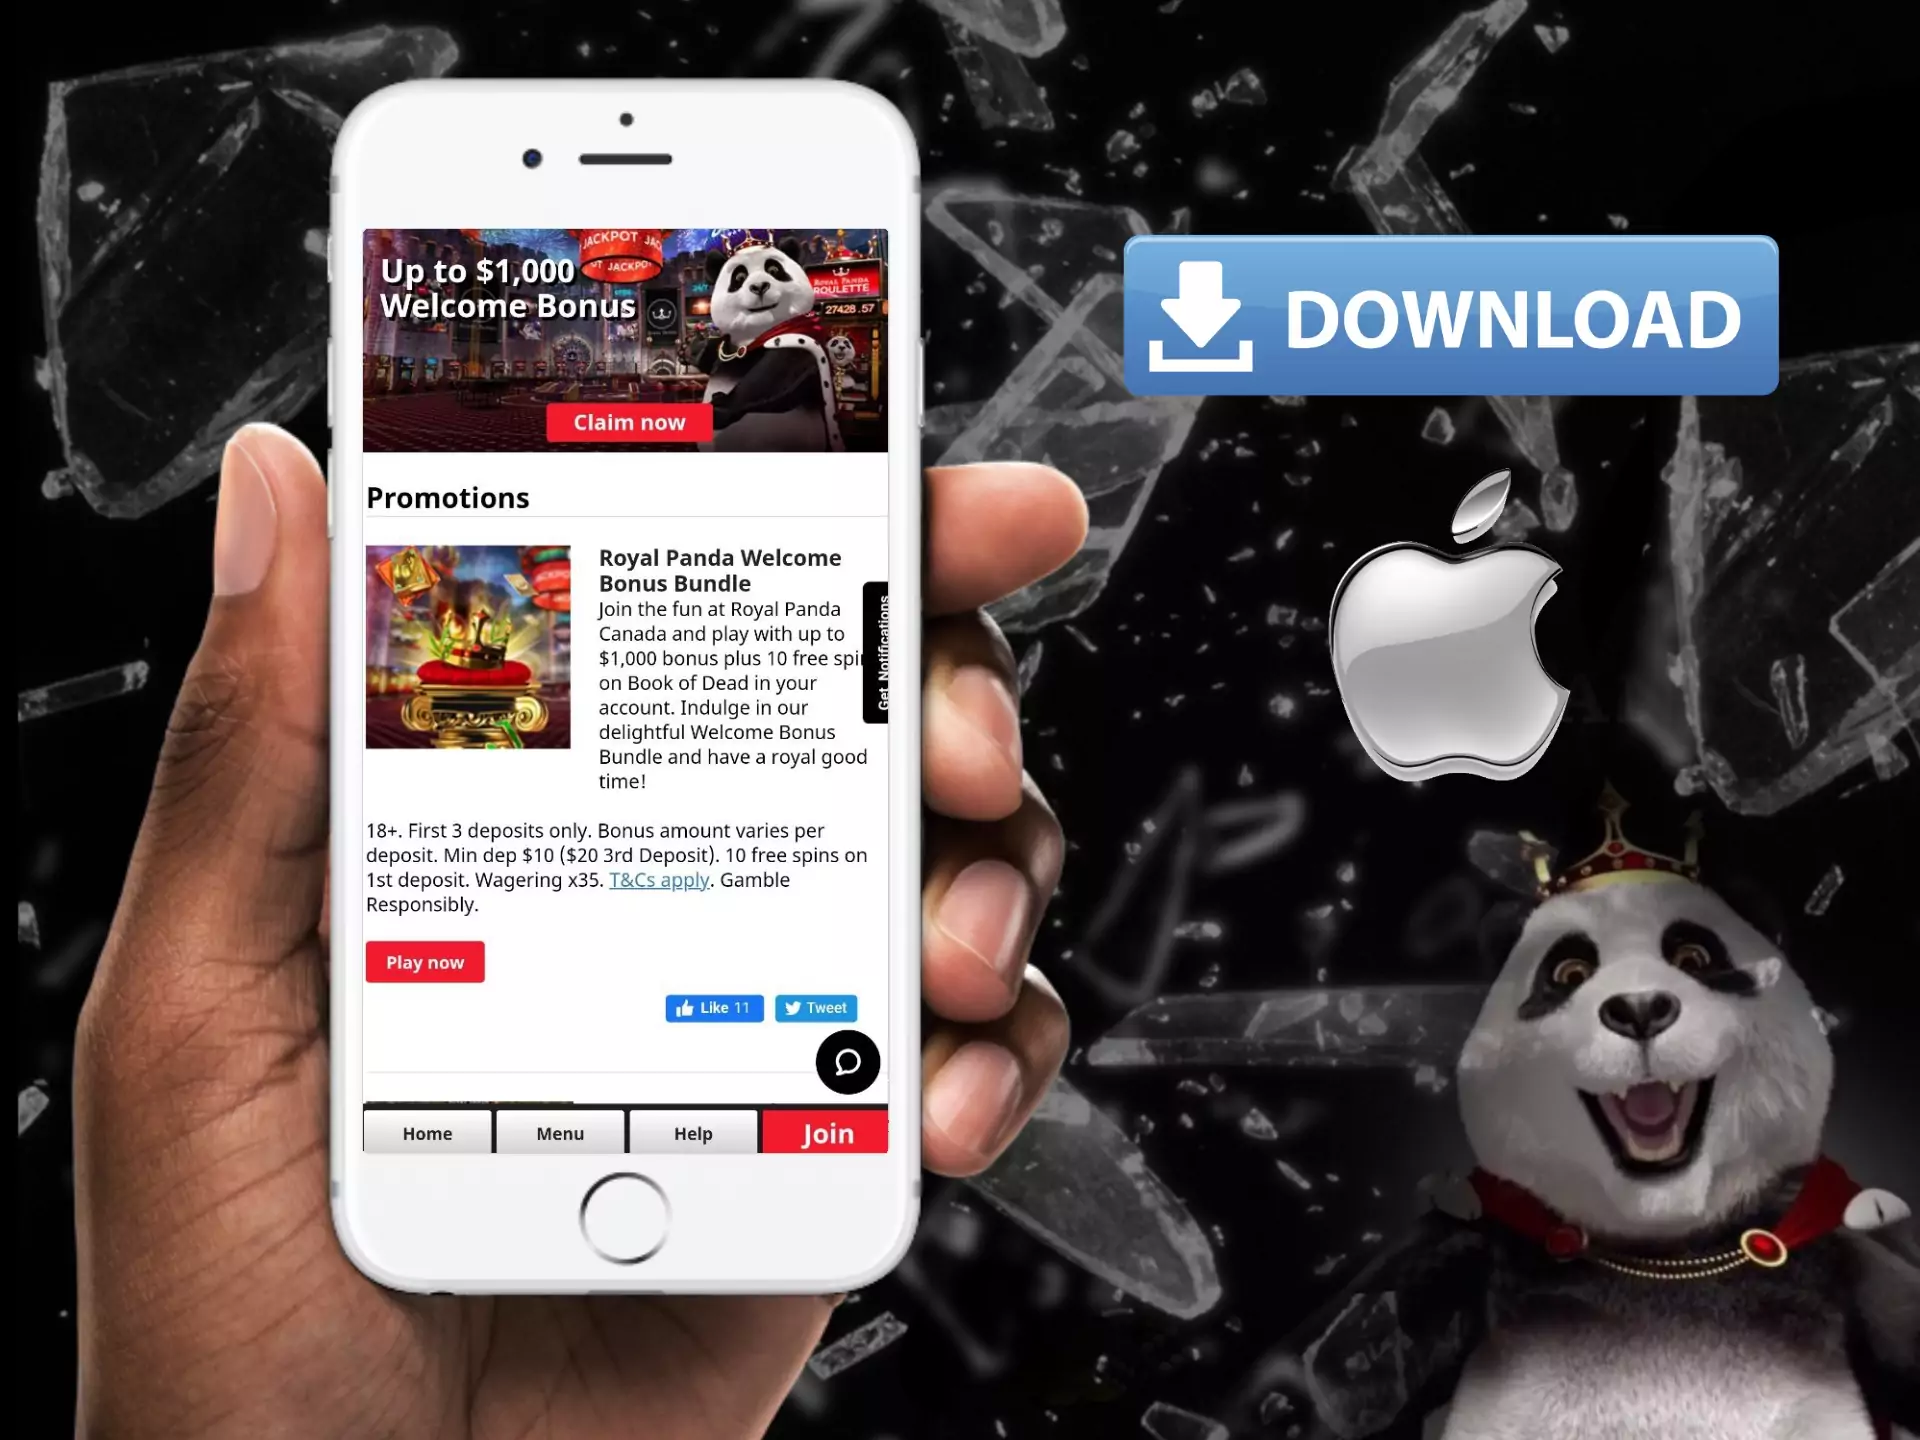 Download the Royal Panda app for iOS from the official site.